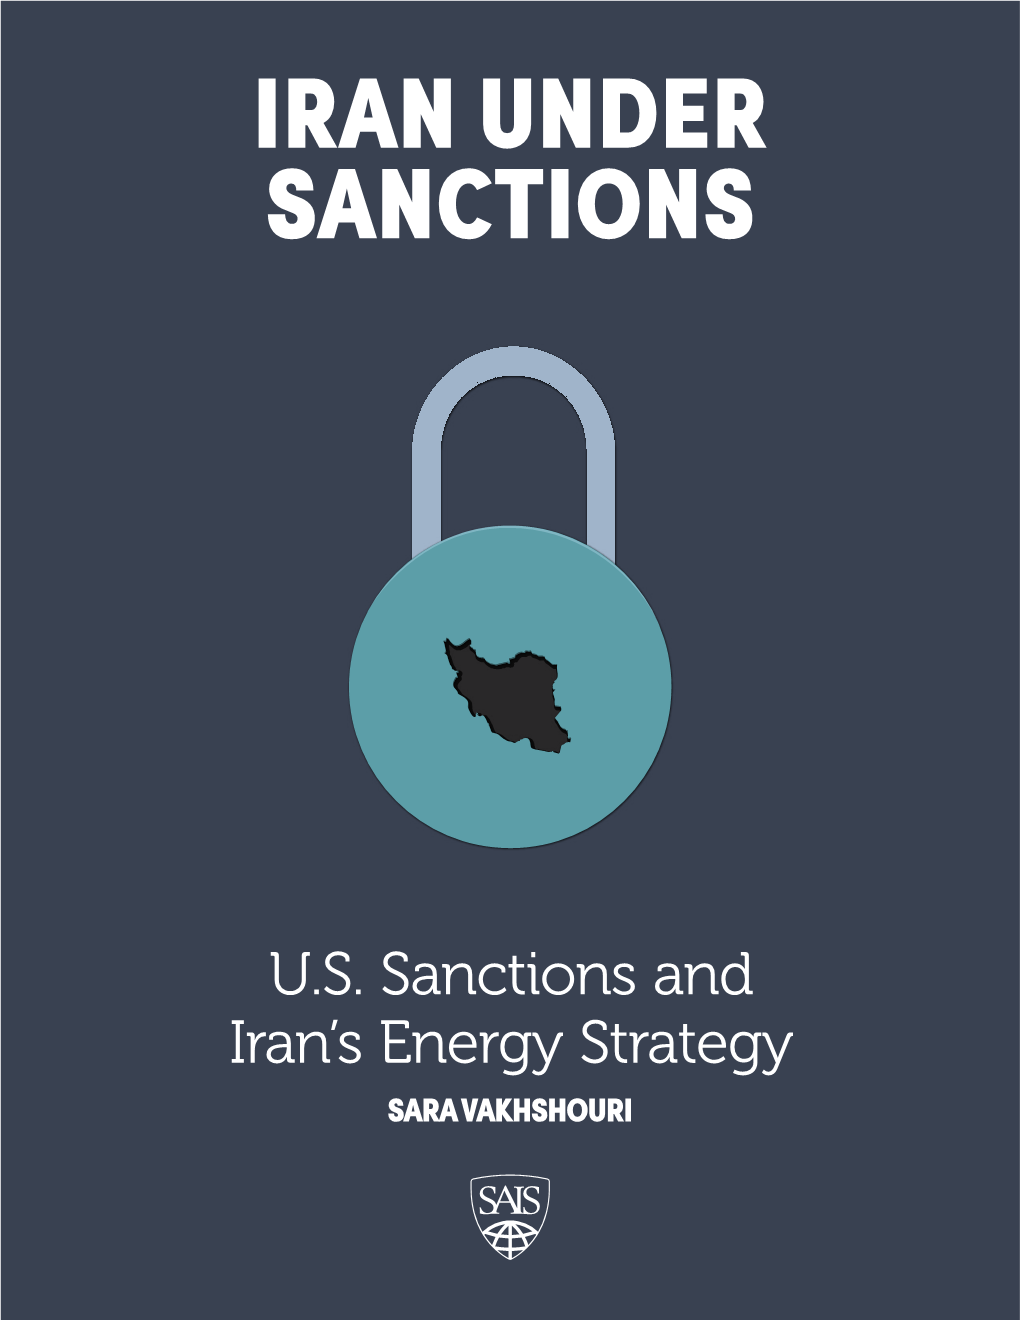 IRAN UNDER SANCTIONS Iran’S Economy Has Been Under Sanctions in One Form Or Another Since the 1979 Revolution